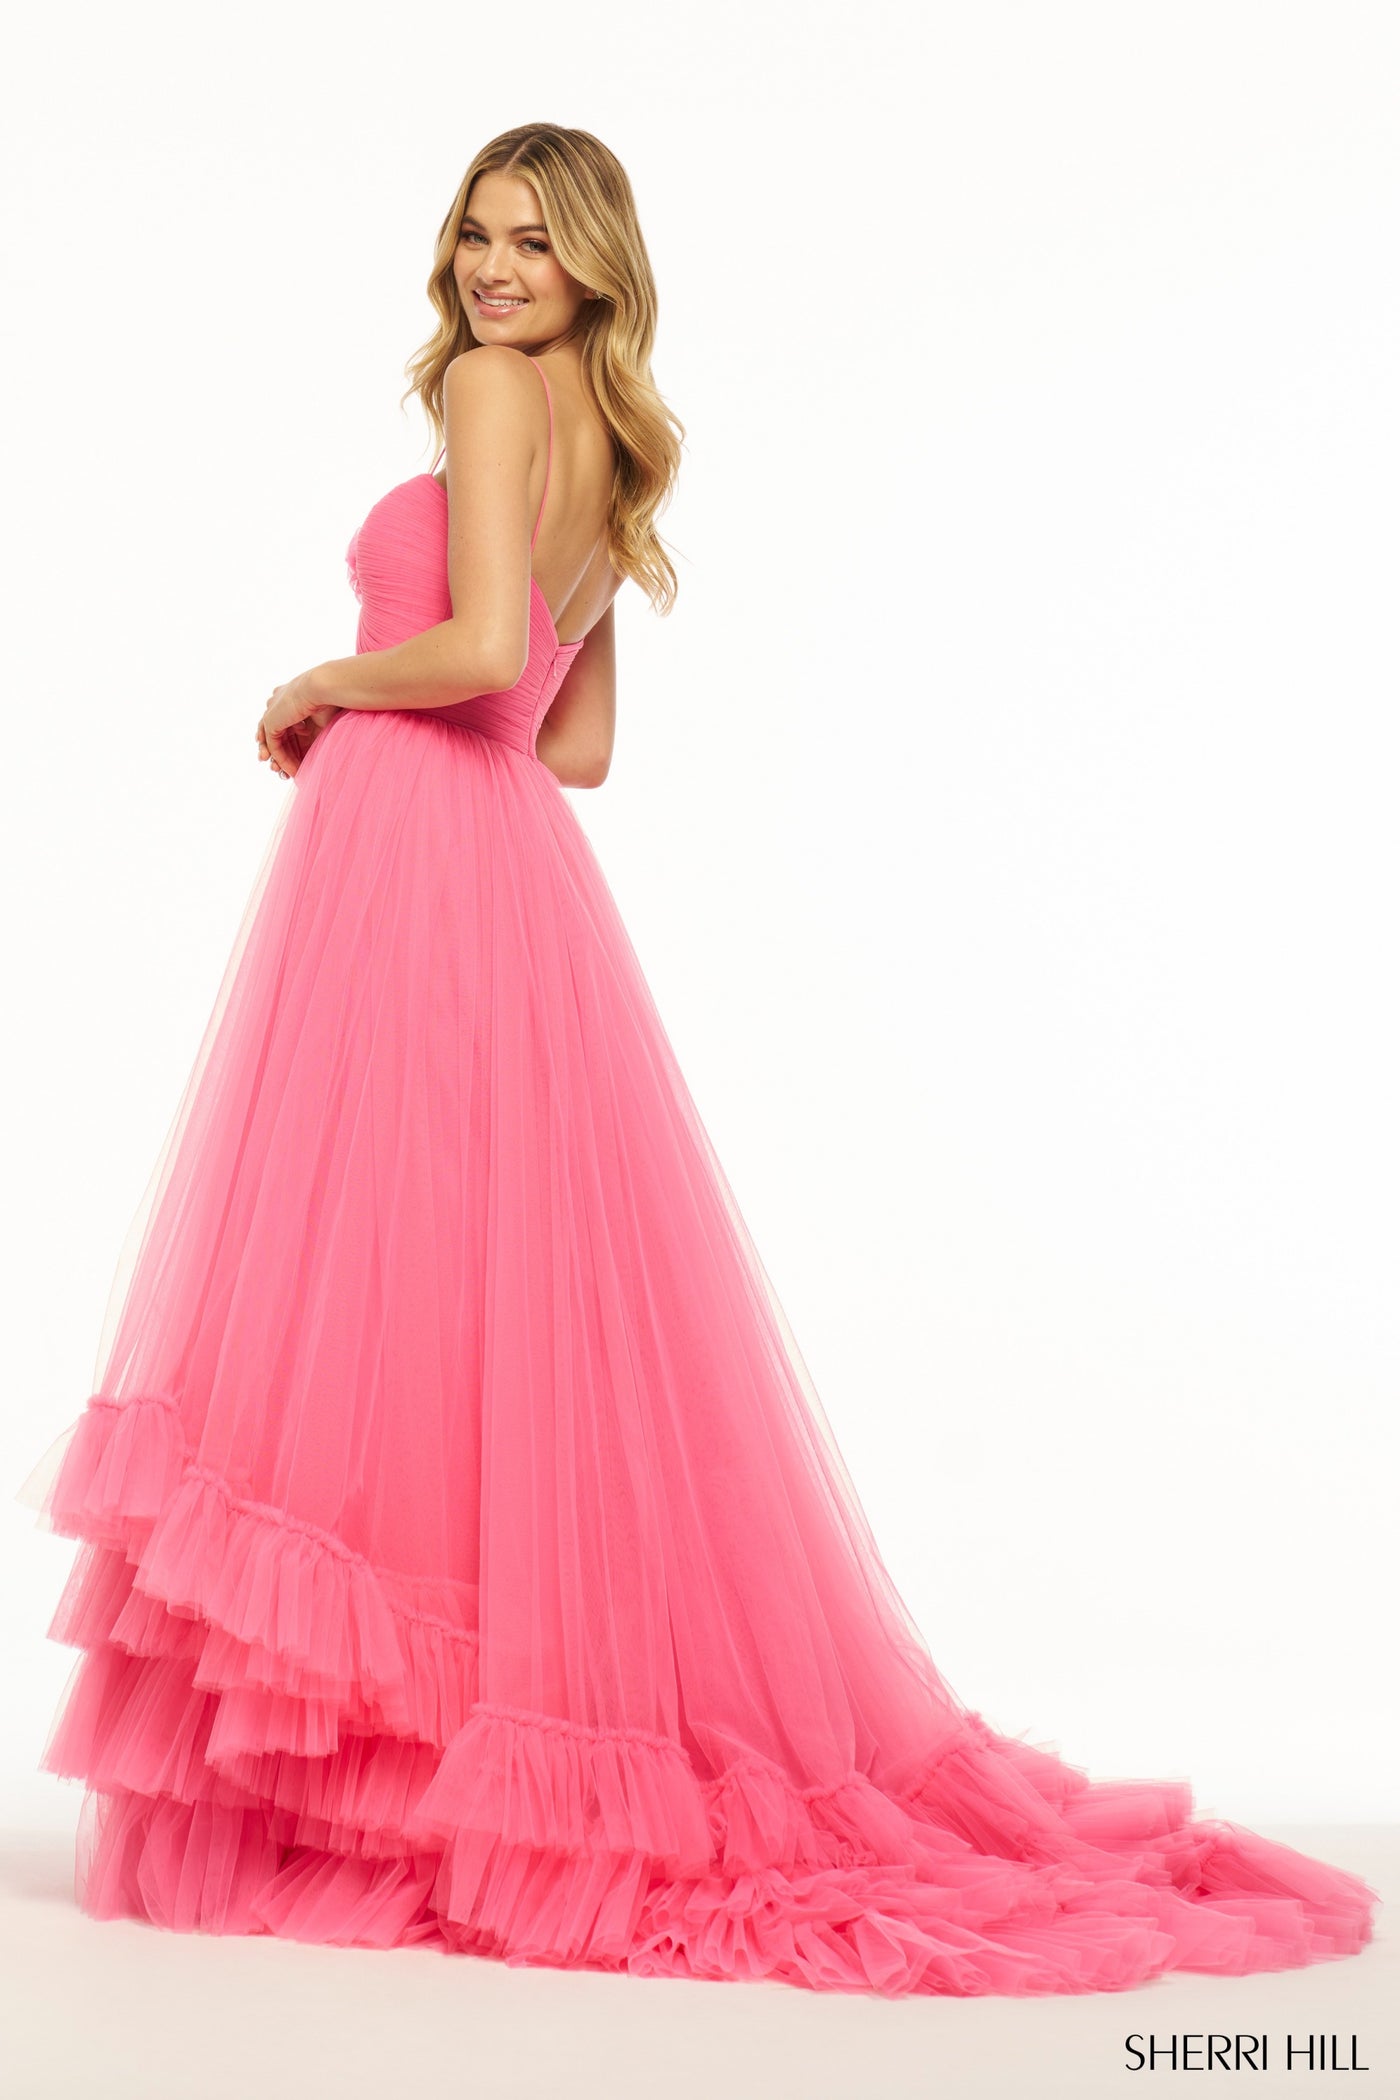 Sherri-Hill-55982-Sweetheart-Neckline-A-line-Gown-Tulle-Fabric-Candy-Pink-Long-Dress-Evening-Gown-Prom-Dress-Sherri-Hill